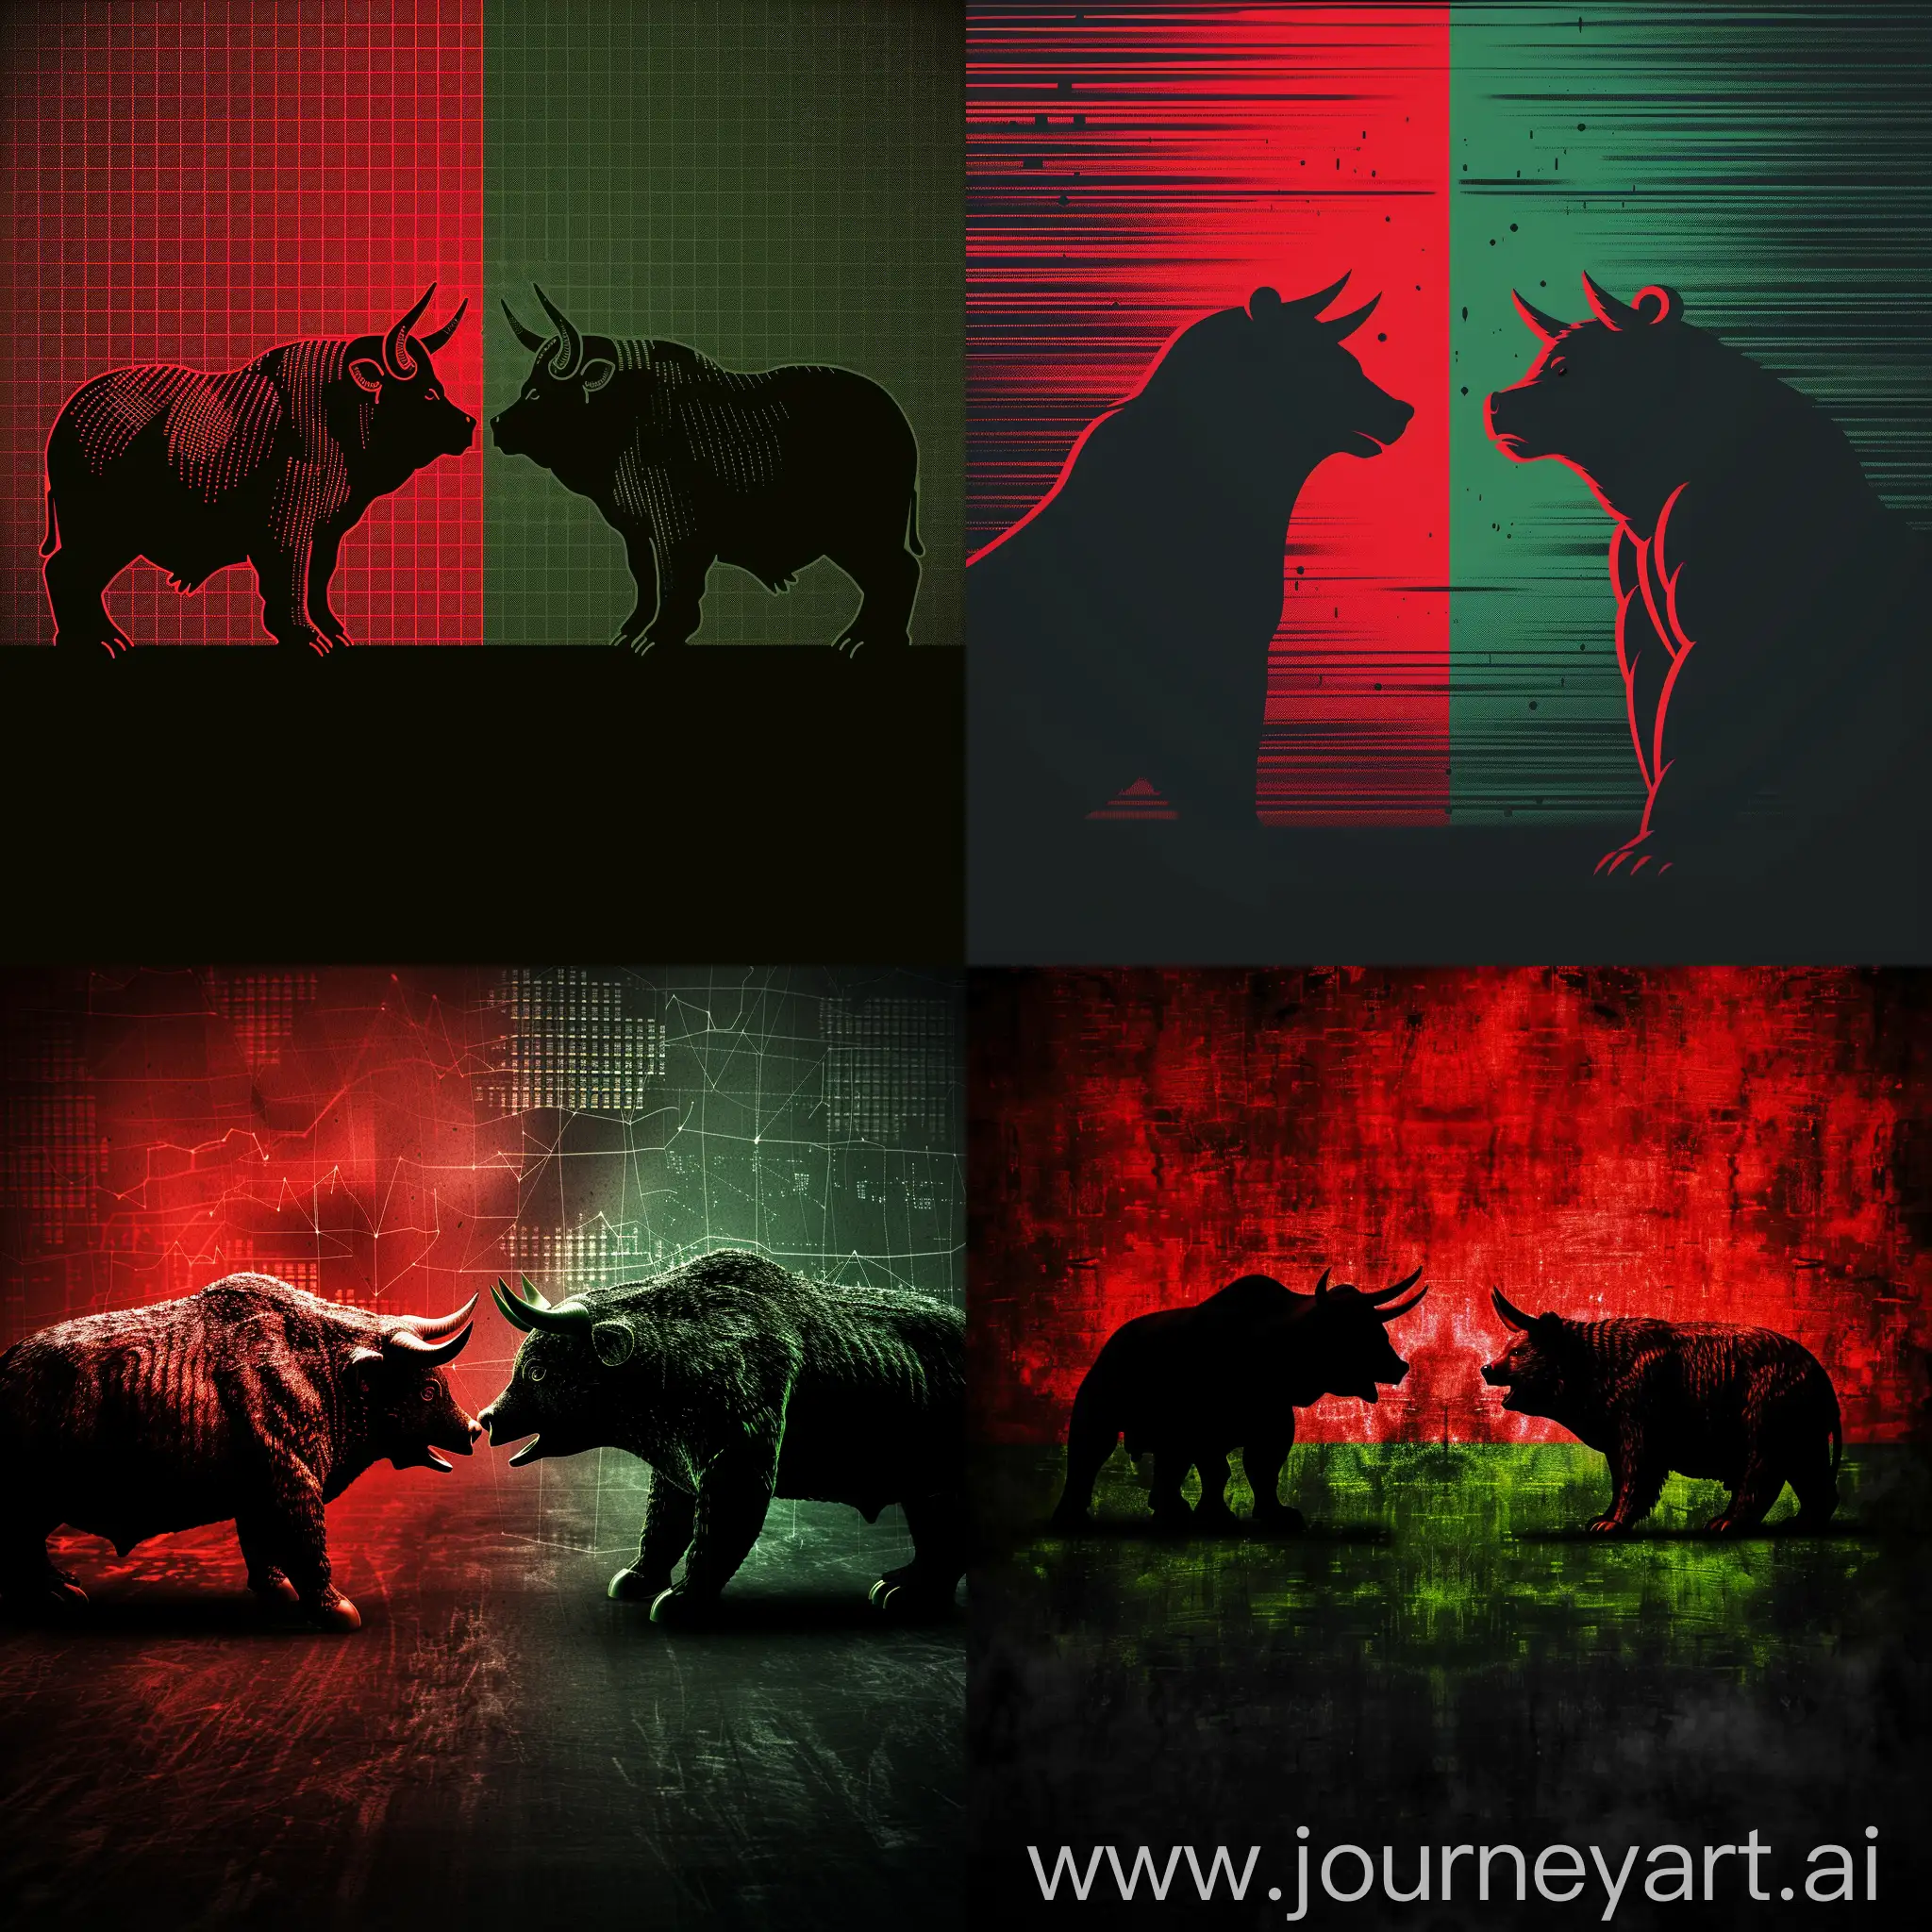 Dynamic-Bulls-and-Bears-Confrontation-on-Vibrant-Trading-Background